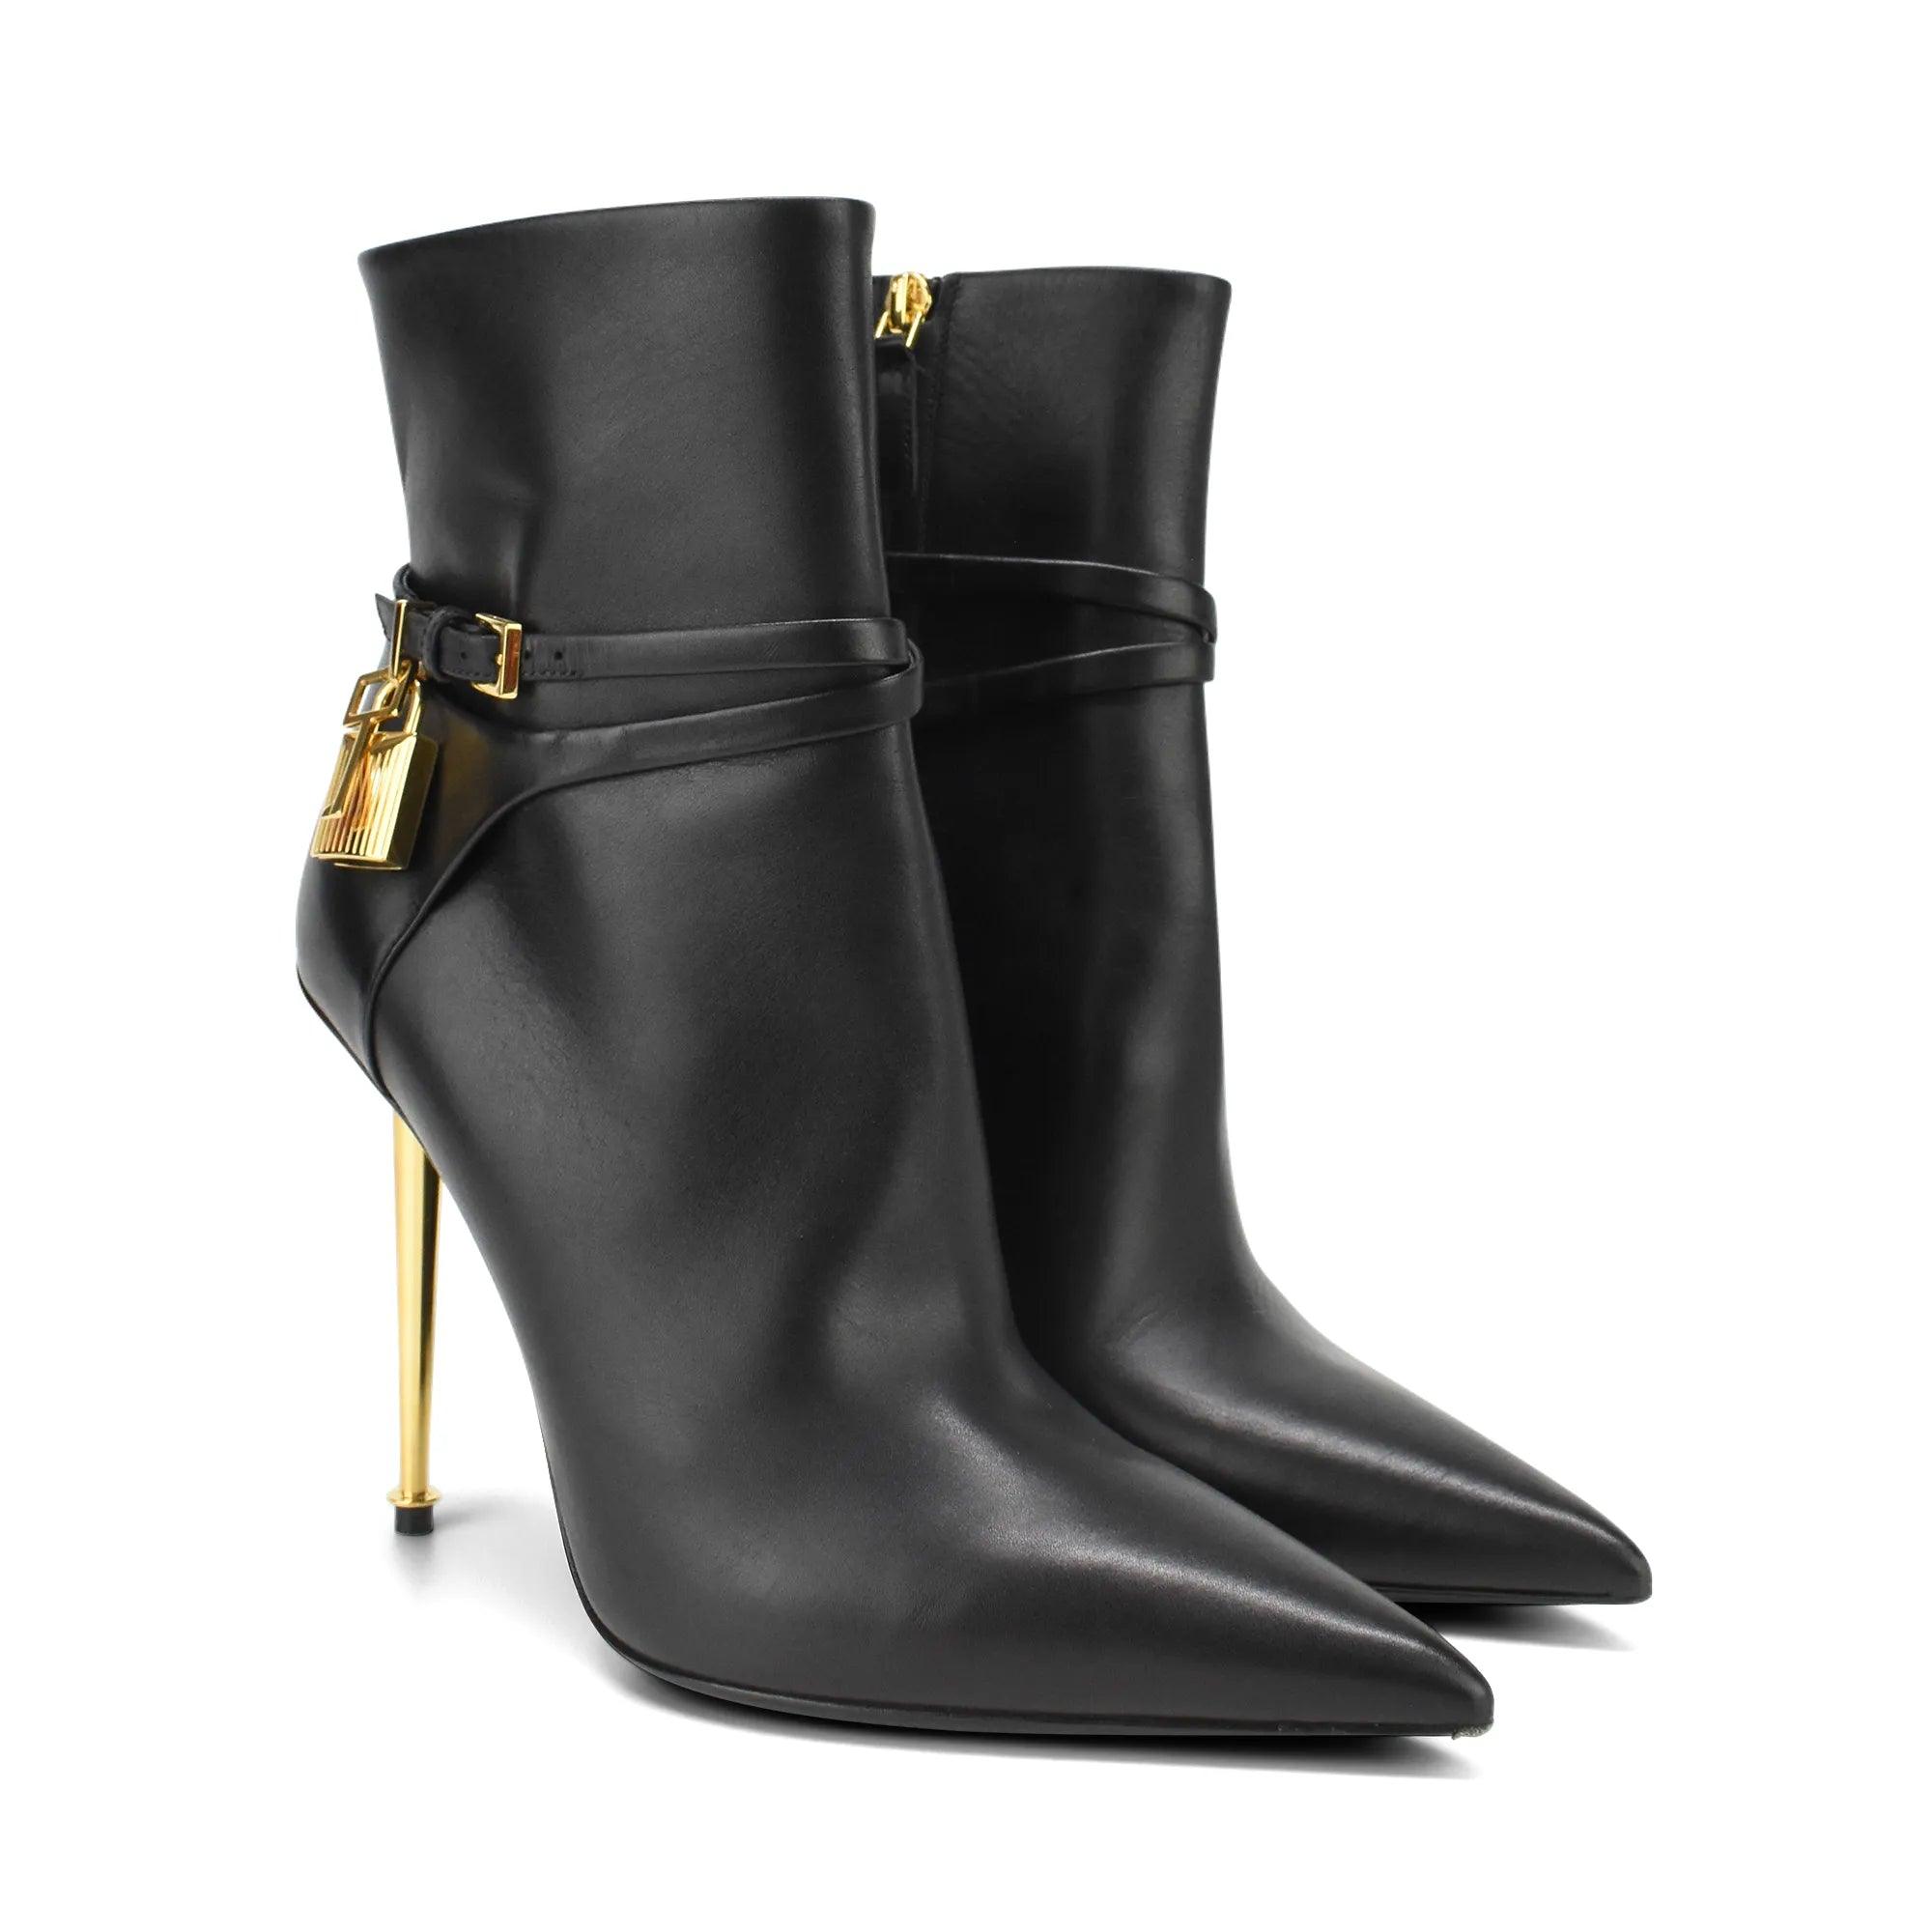 Tom Ford Ankle Boots - Women's 37 - Fashionably Yours